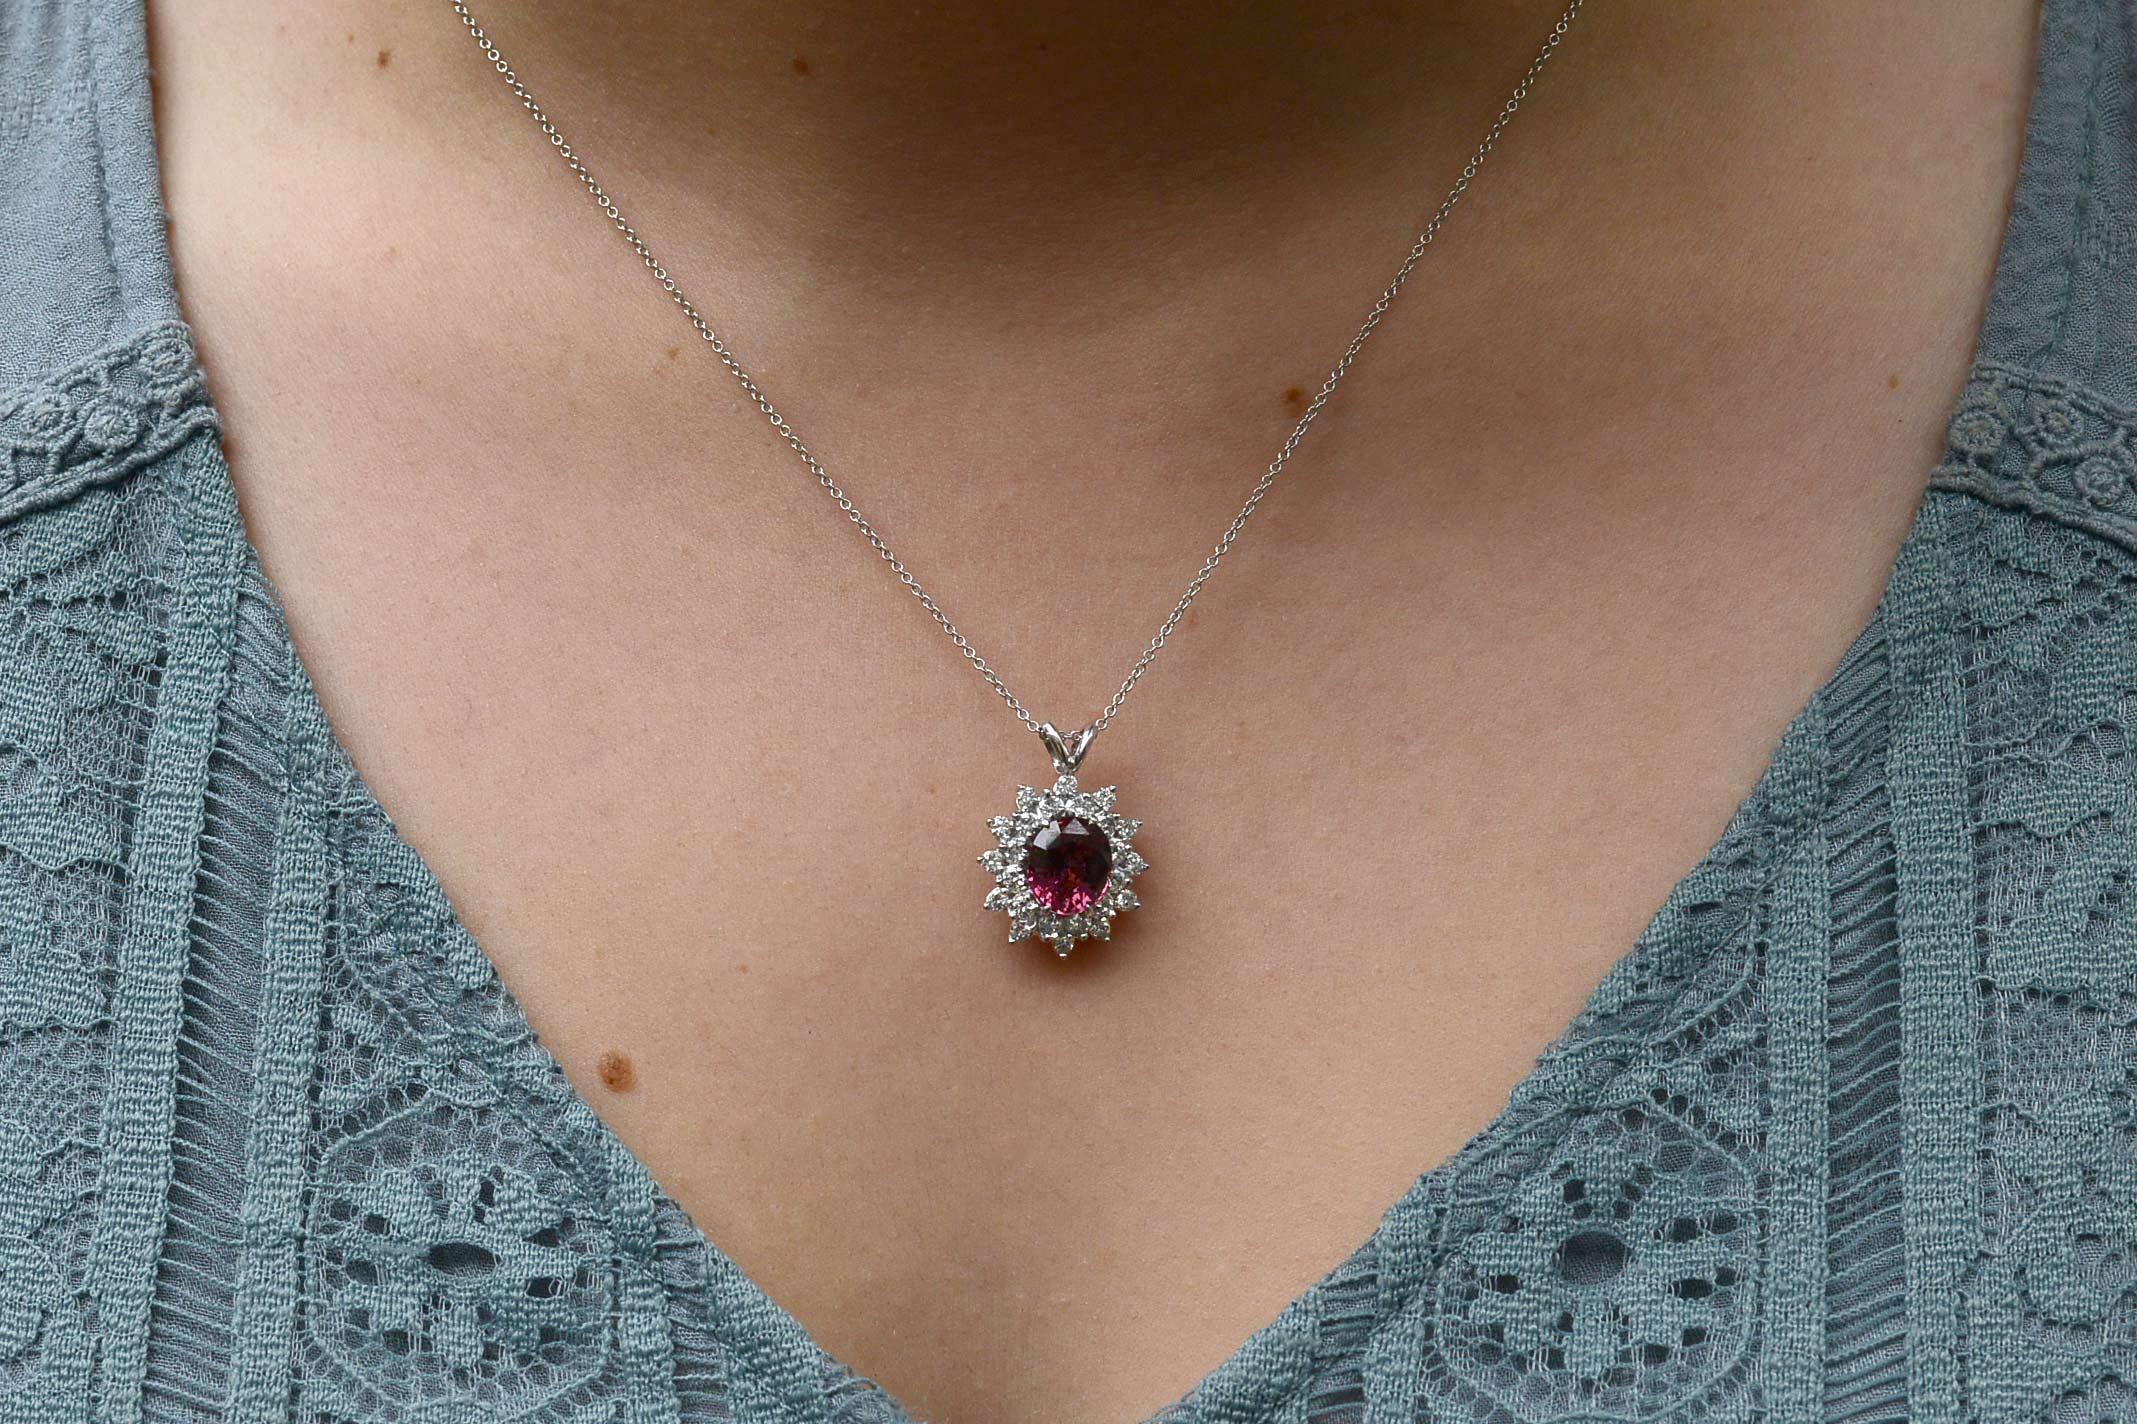 The Encinitas Pendant Necklace. The captivating, vivid pink of this 3.02 carat certified, natural sapphire is breathtaking. Held within a platinum halo encircled with a wreath of 24 sparkling diamonds, a classic pendant necklace that you can enjoy